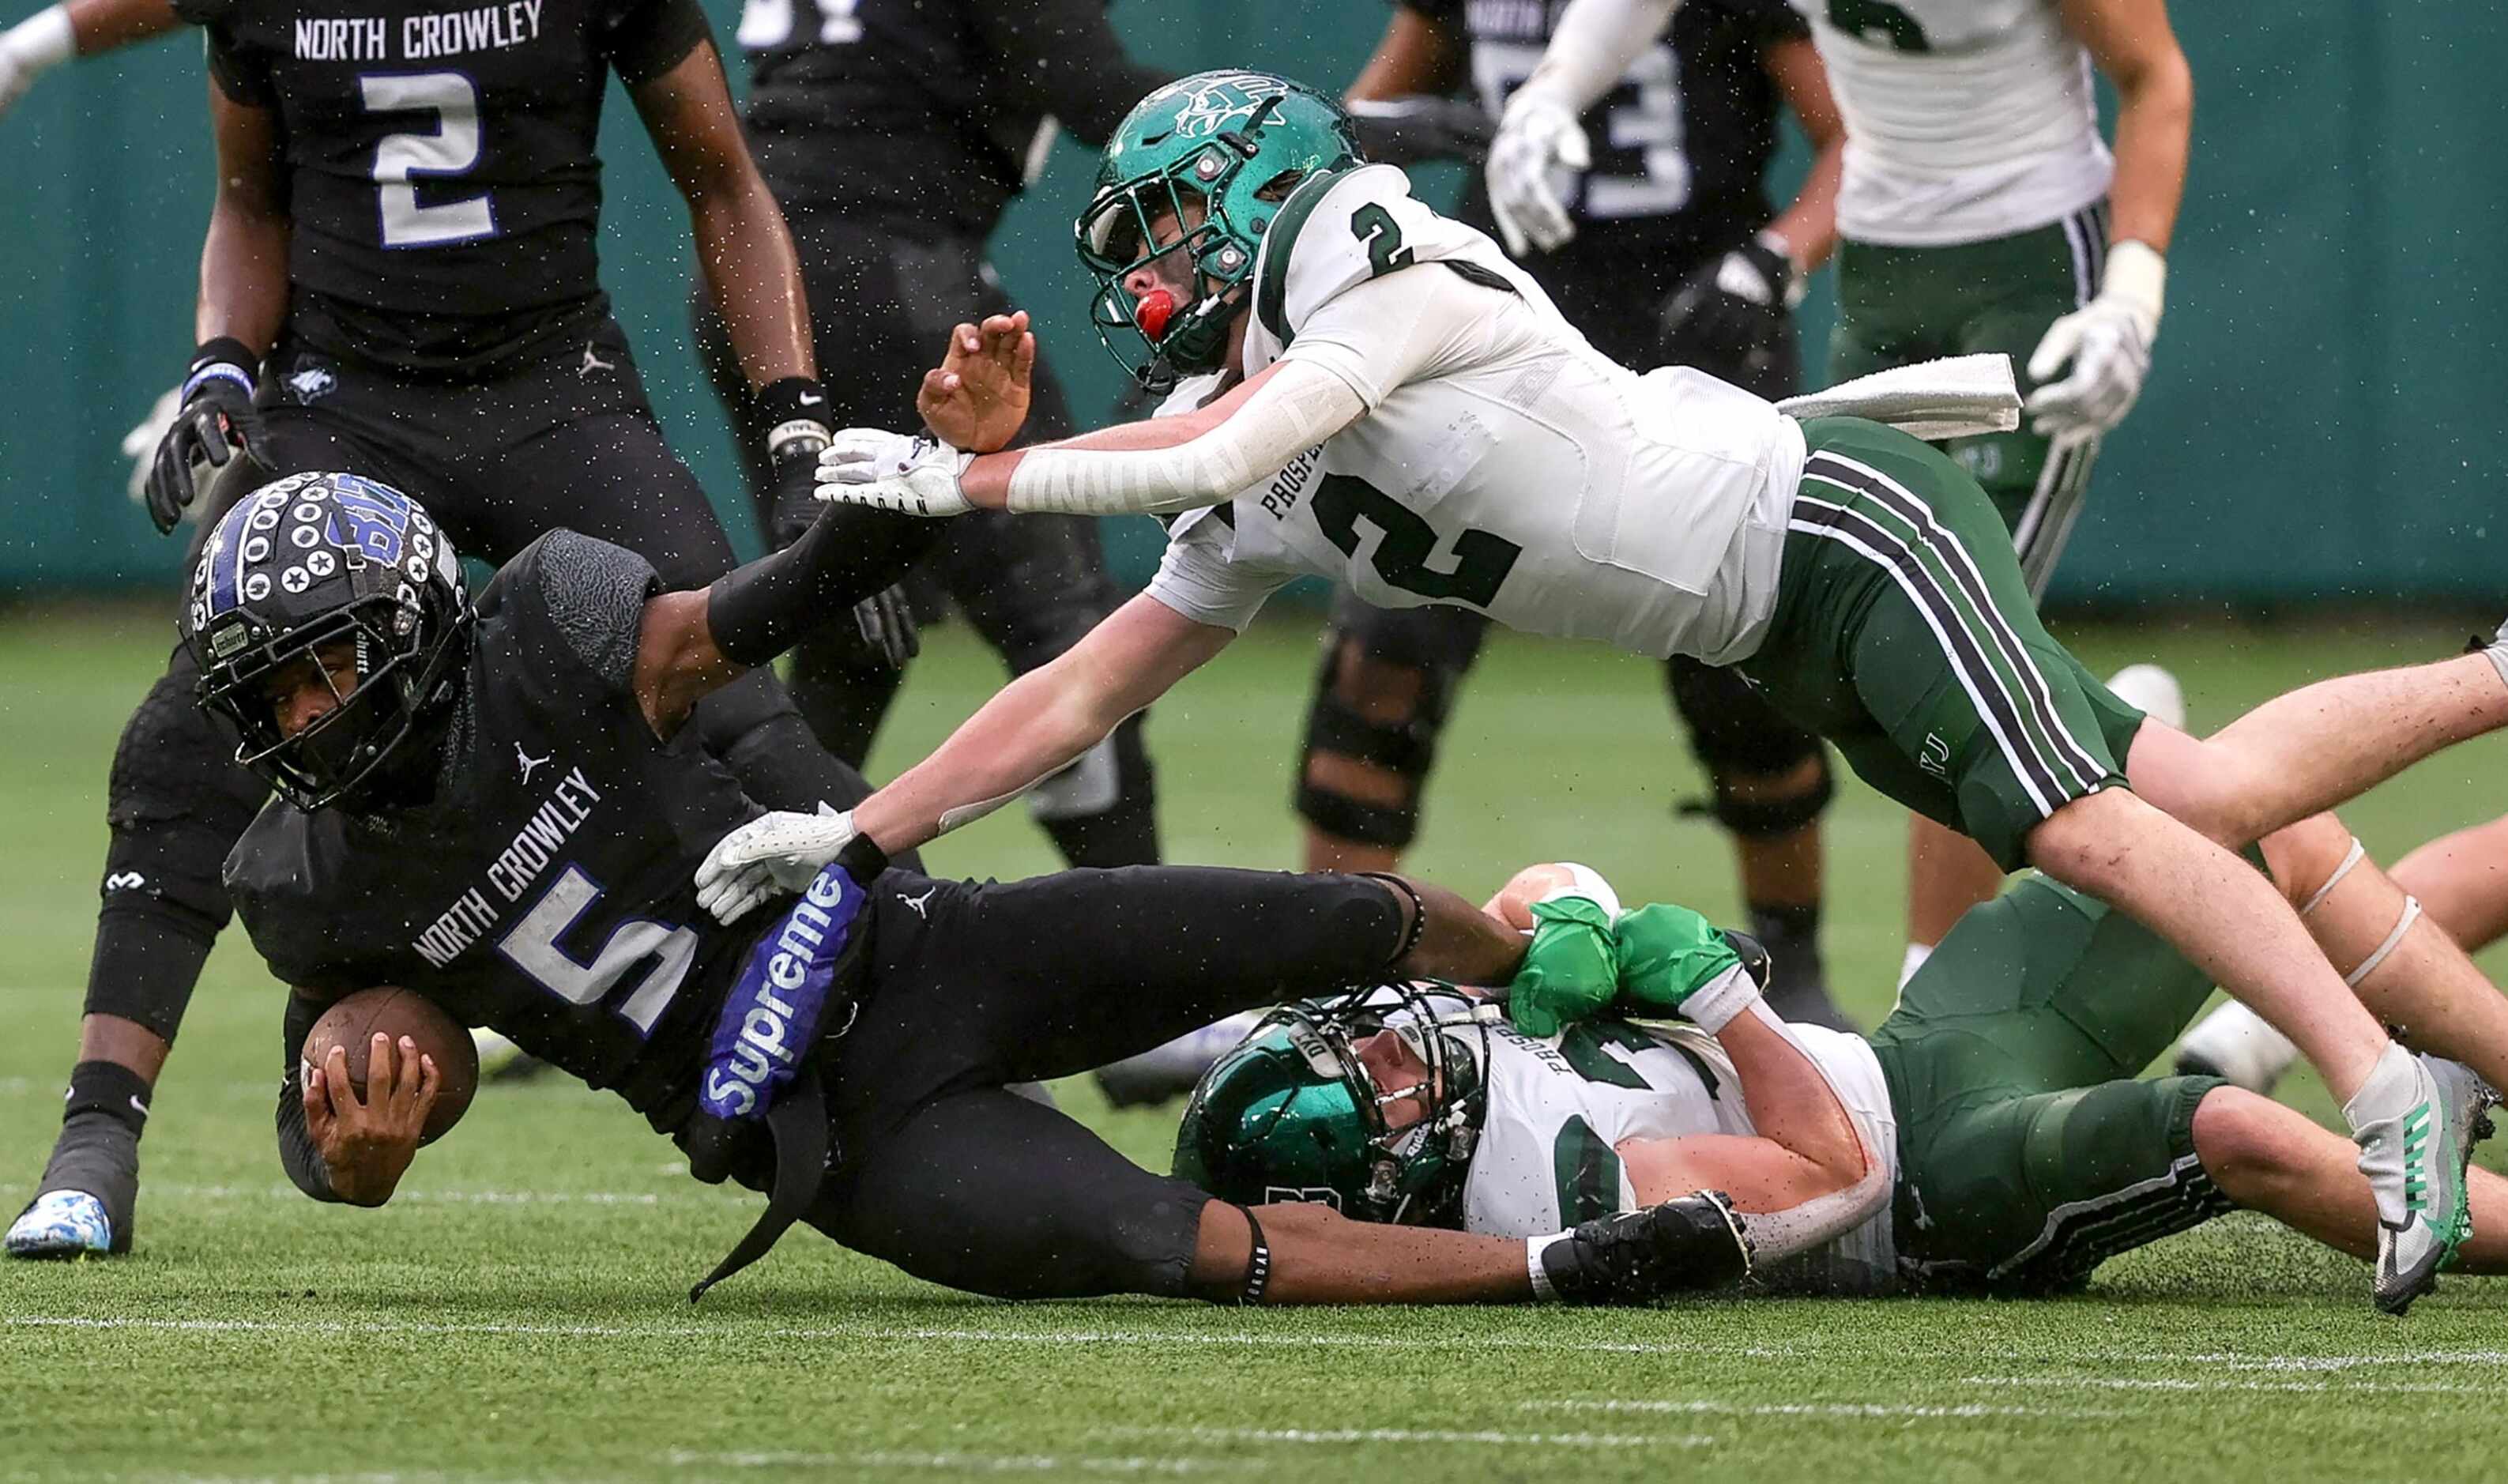 North Crowley running back Dejuan Lacy (5) is dragged down by Prosper linebacker Jonah...